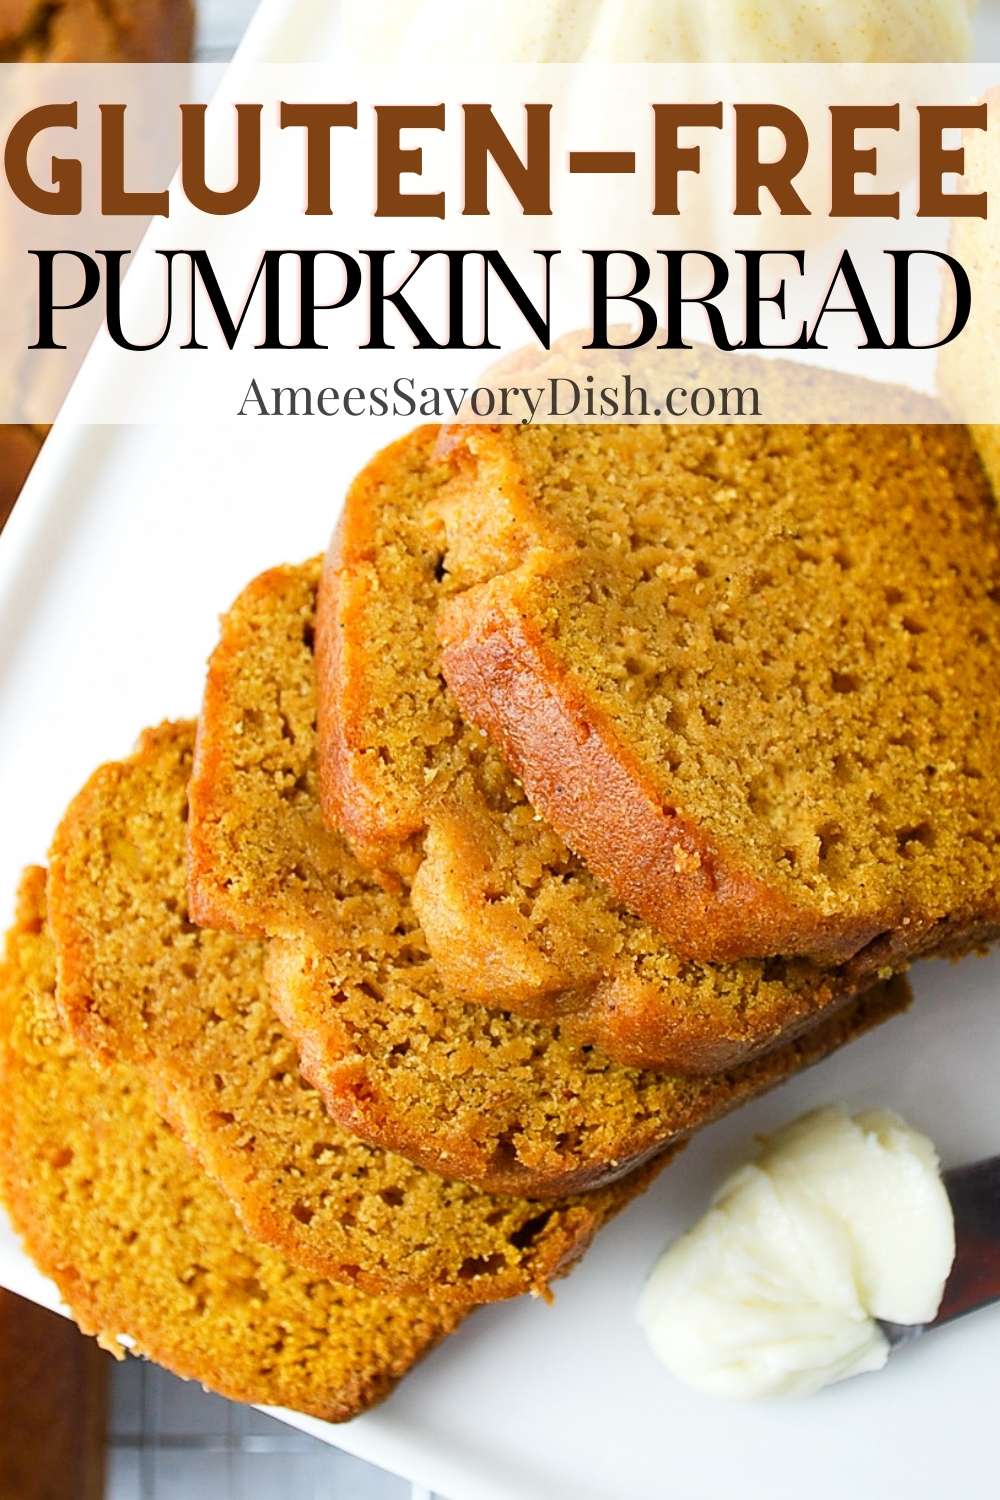 Gluten-free Pumpkin Bread recipe makes a tender and tasty gluten-free quick bread with pureed pumpkin and warm and cozy pumpkin pie spices. via @Ameessavorydish